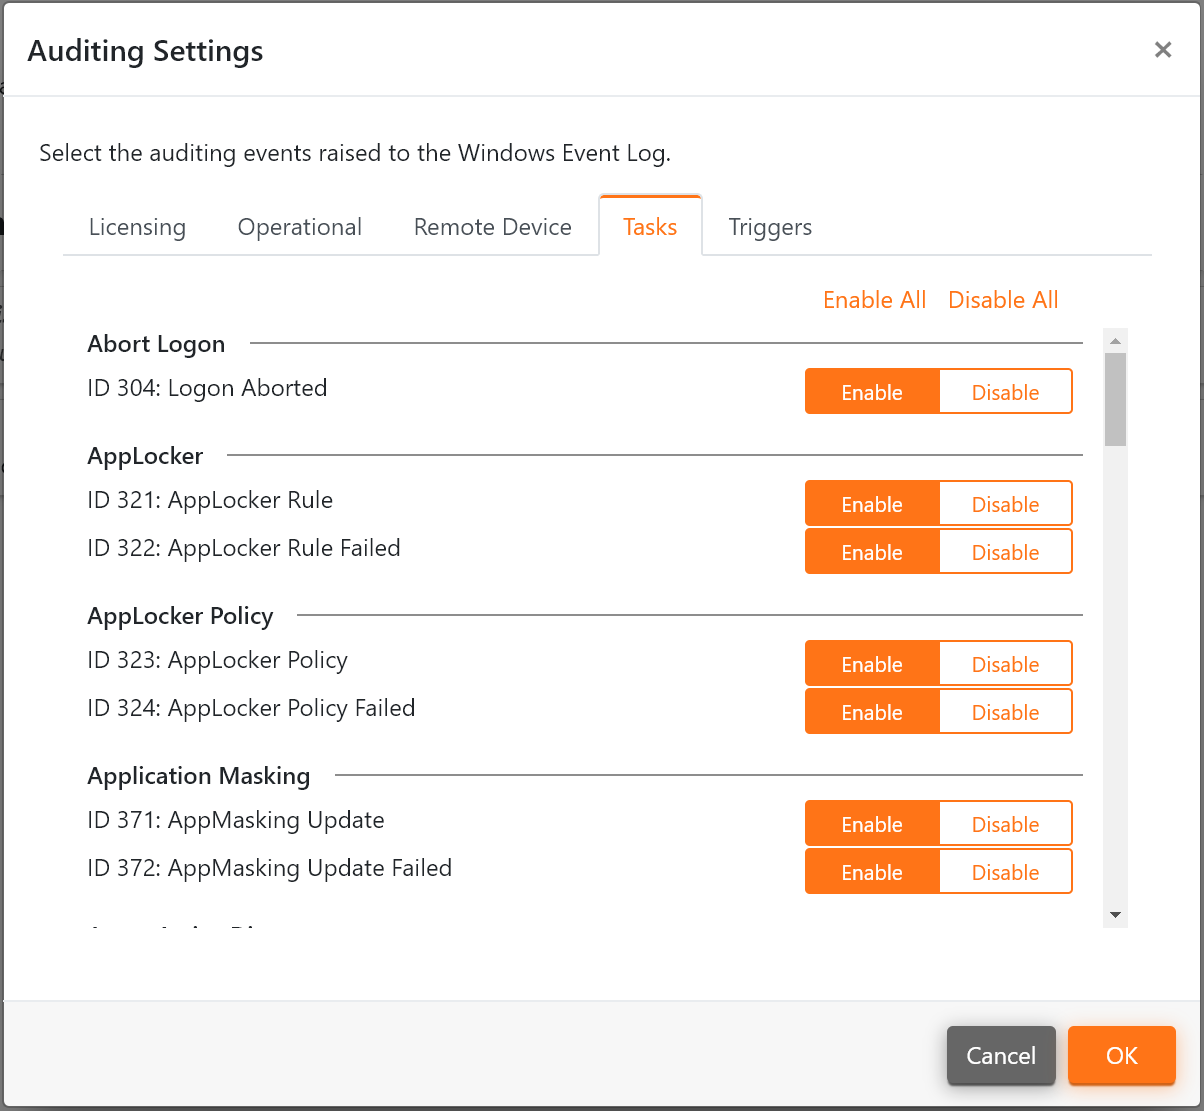 The Task Auditing Settings.